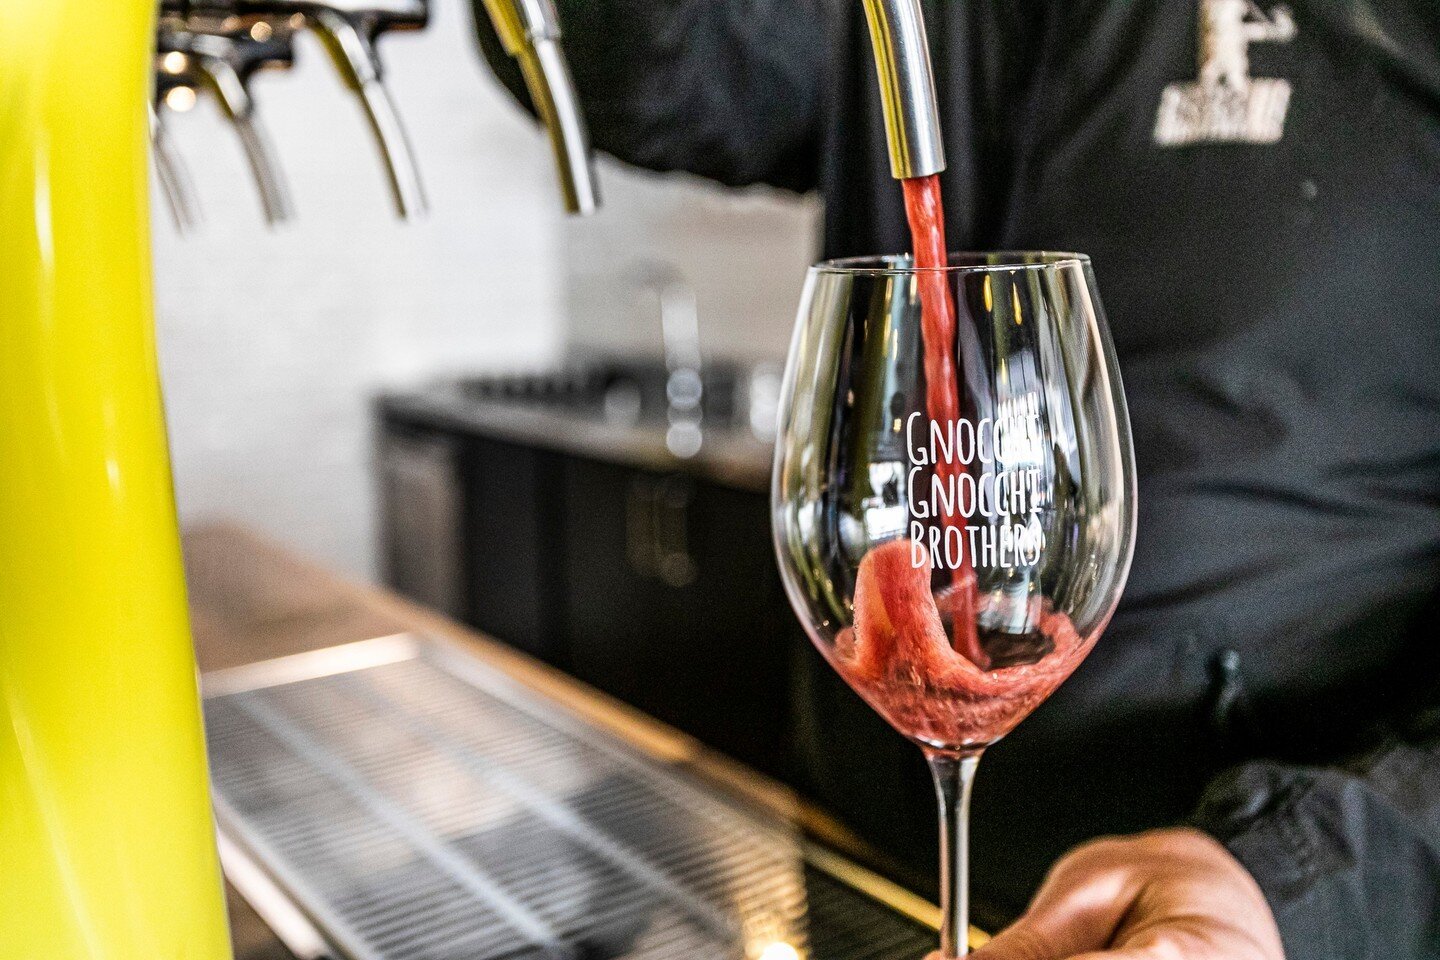 PR: At @gnocchignocchibrothers Newtown you can try sustainable and organic wines on tap! 🍷⁠
⁠
MOVE NOW: grace@mvmnt-agency.com